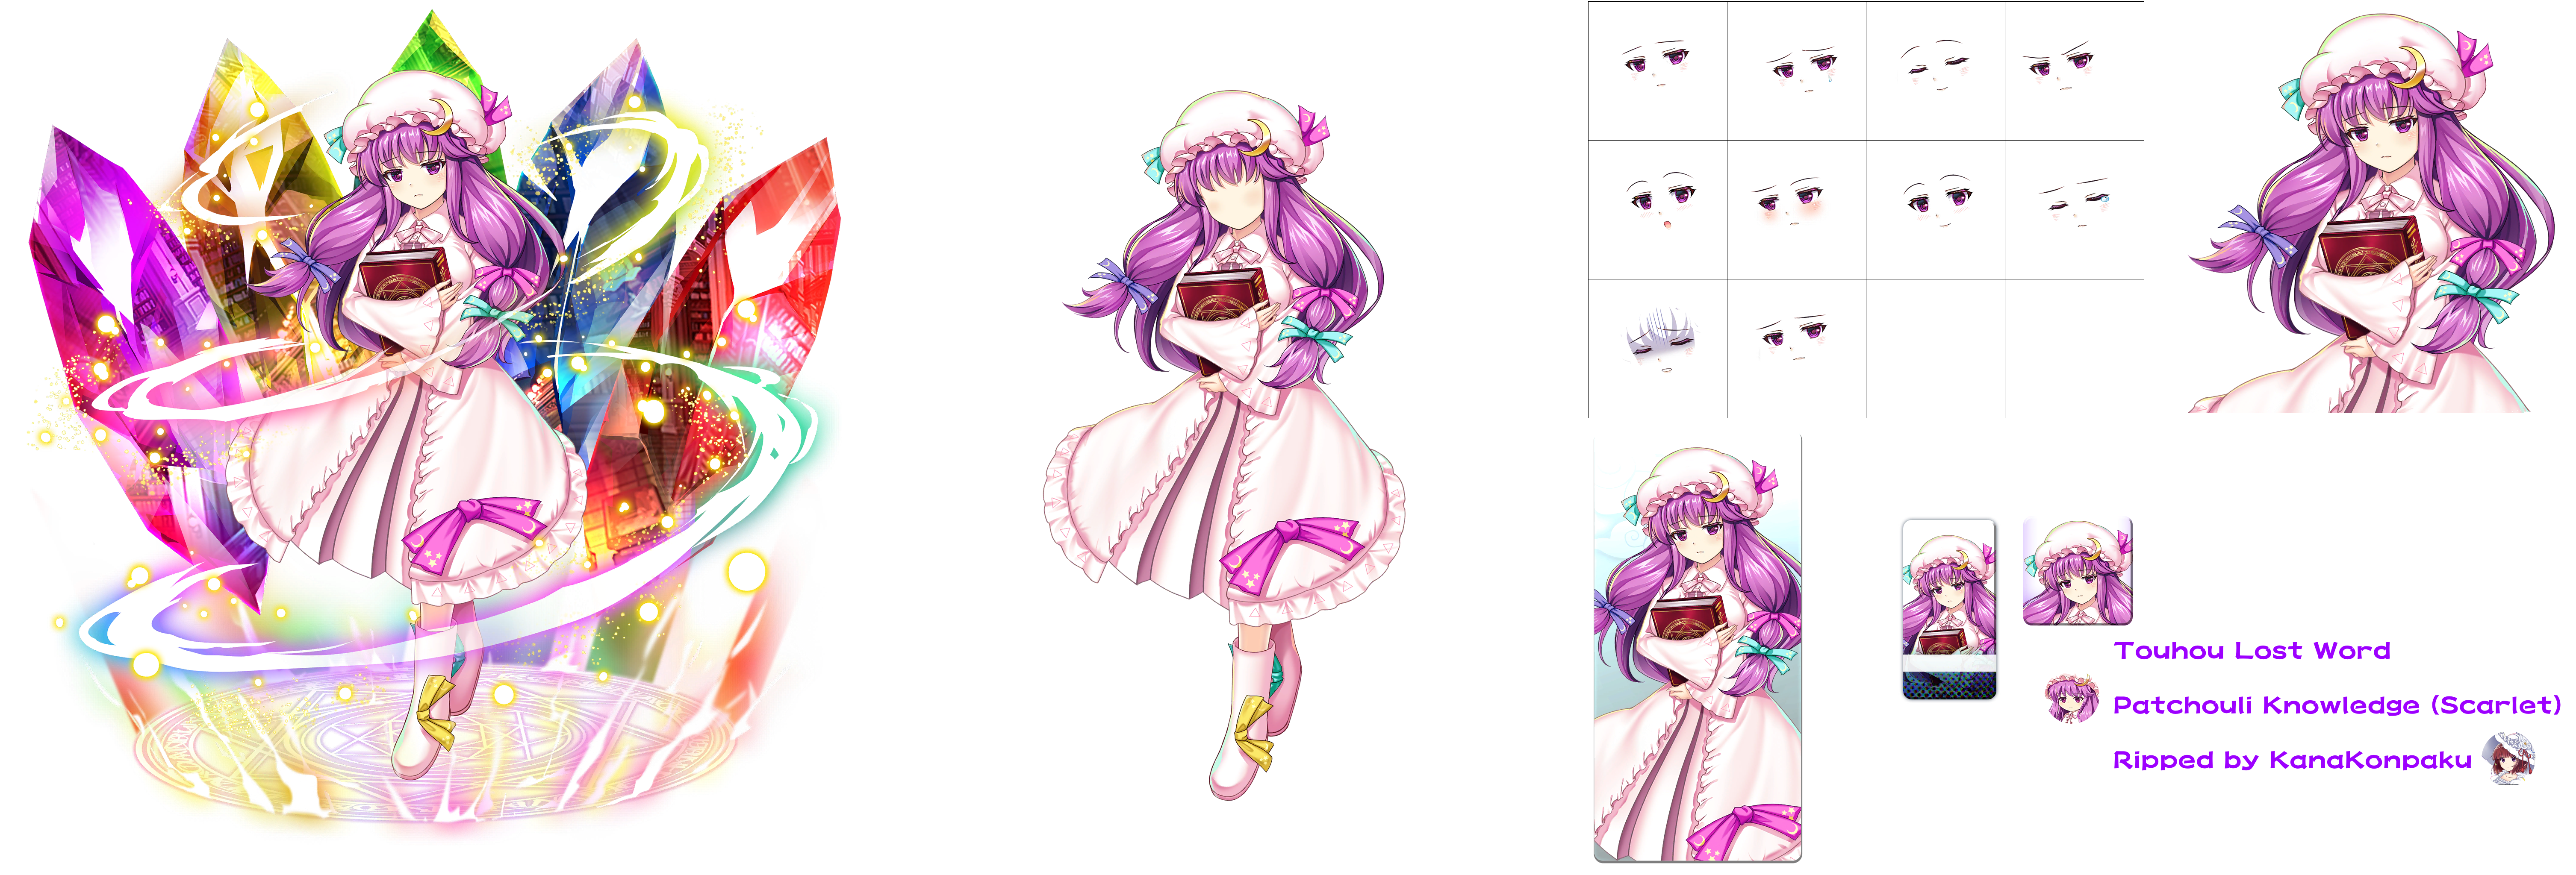 Patchouli is kind of a vibe, tbh : r/touhou